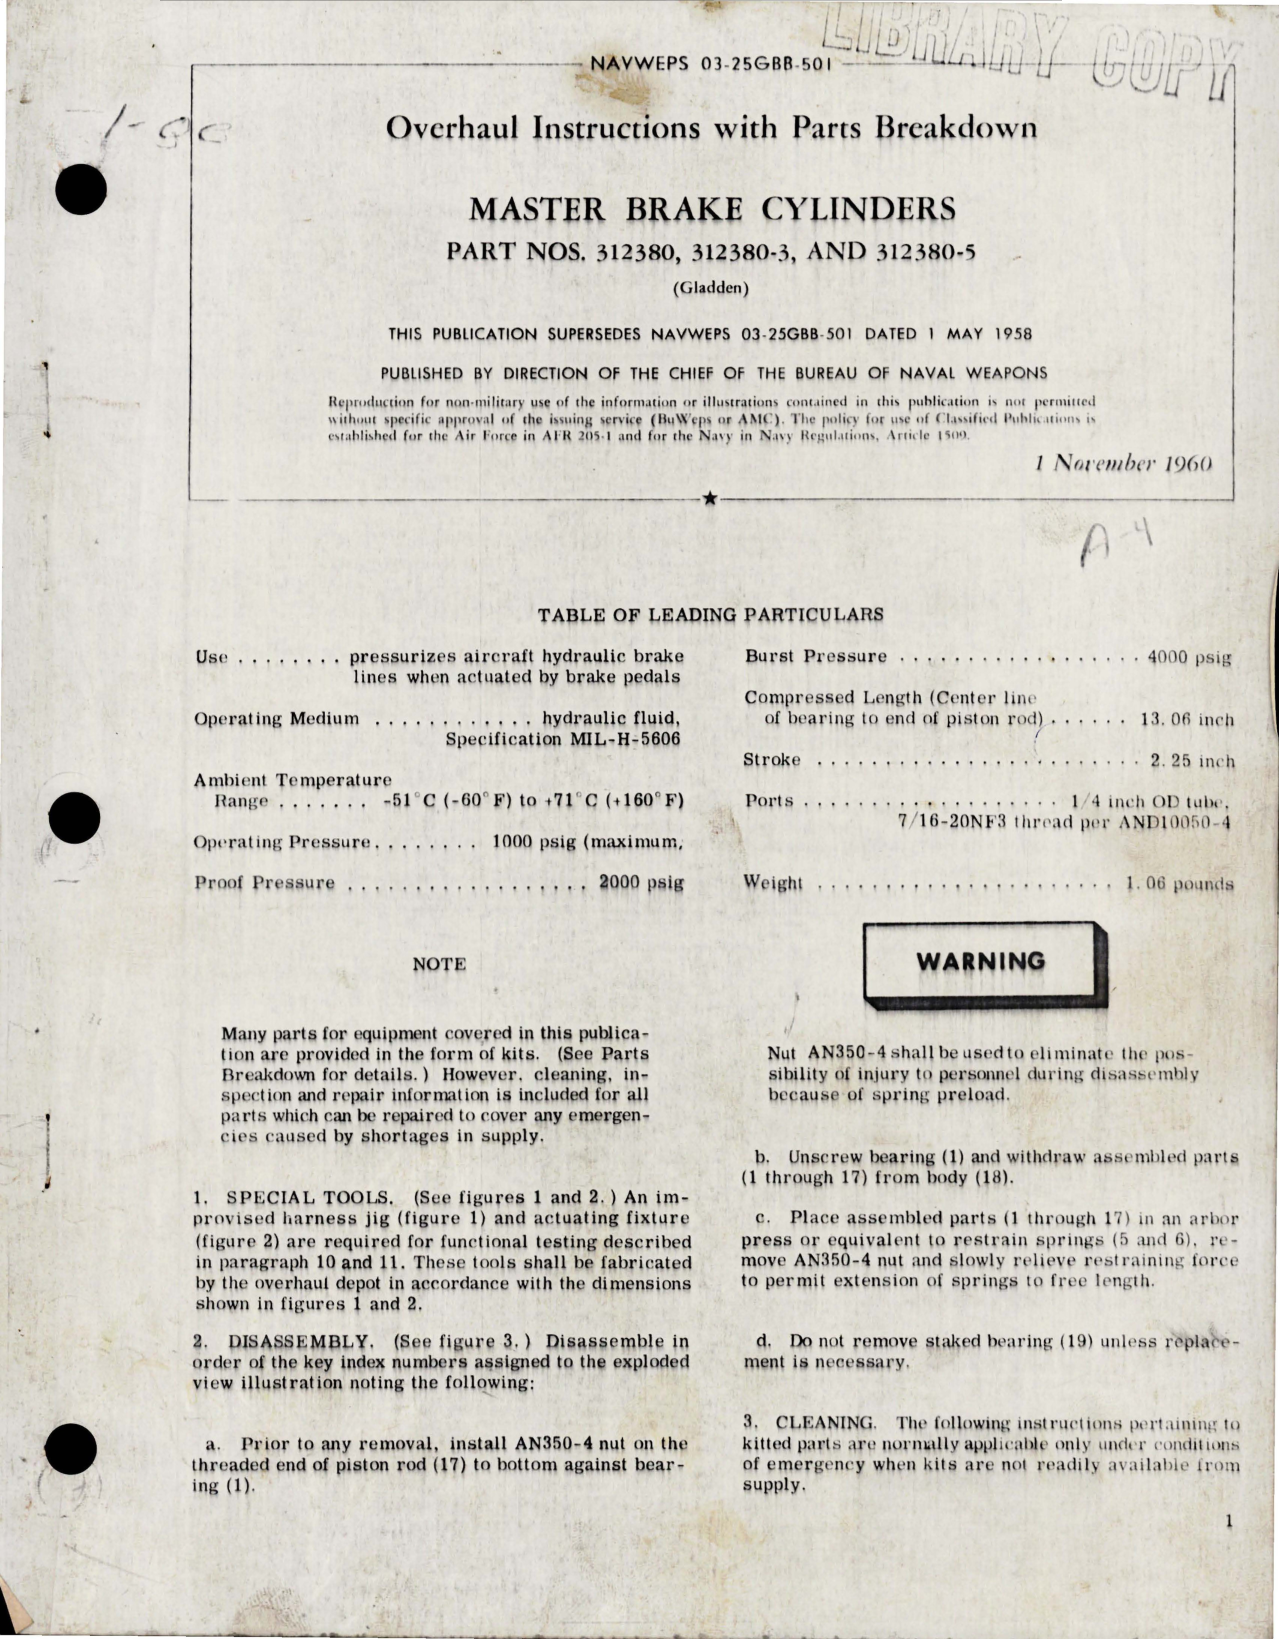 Sample page 1 from AirCorps Library document: Overhaul Instructions with Parts Breakdown for Master Brake Cylinders - Parts 312380, 312380-3 and 312380-5 